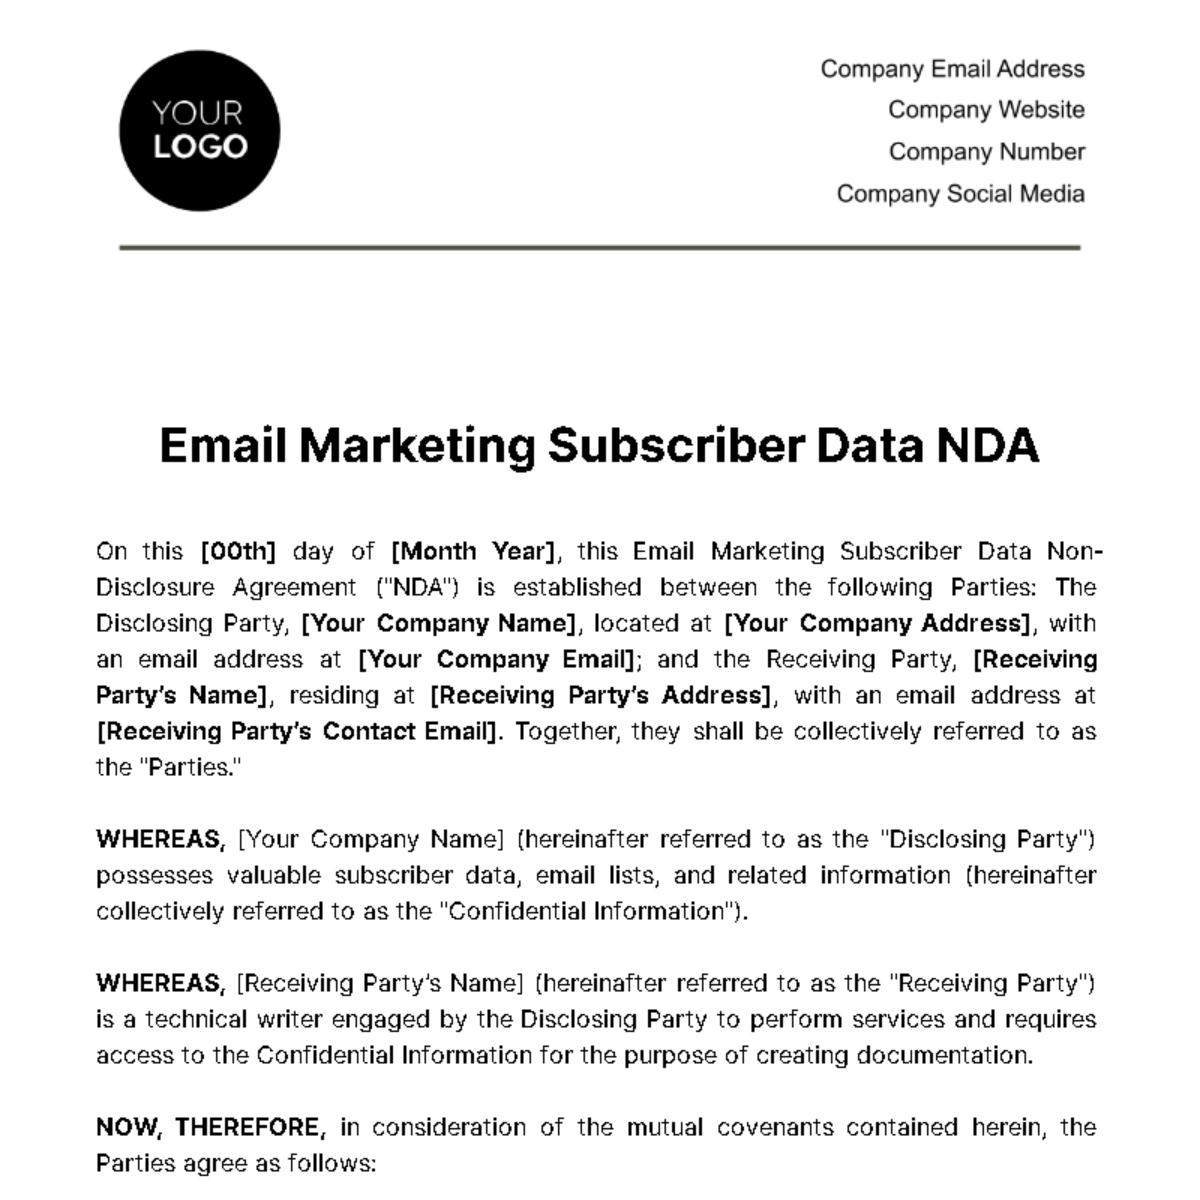 Email Marketing Subscriber Data NDA (Non-Disclosure Agreement) Template